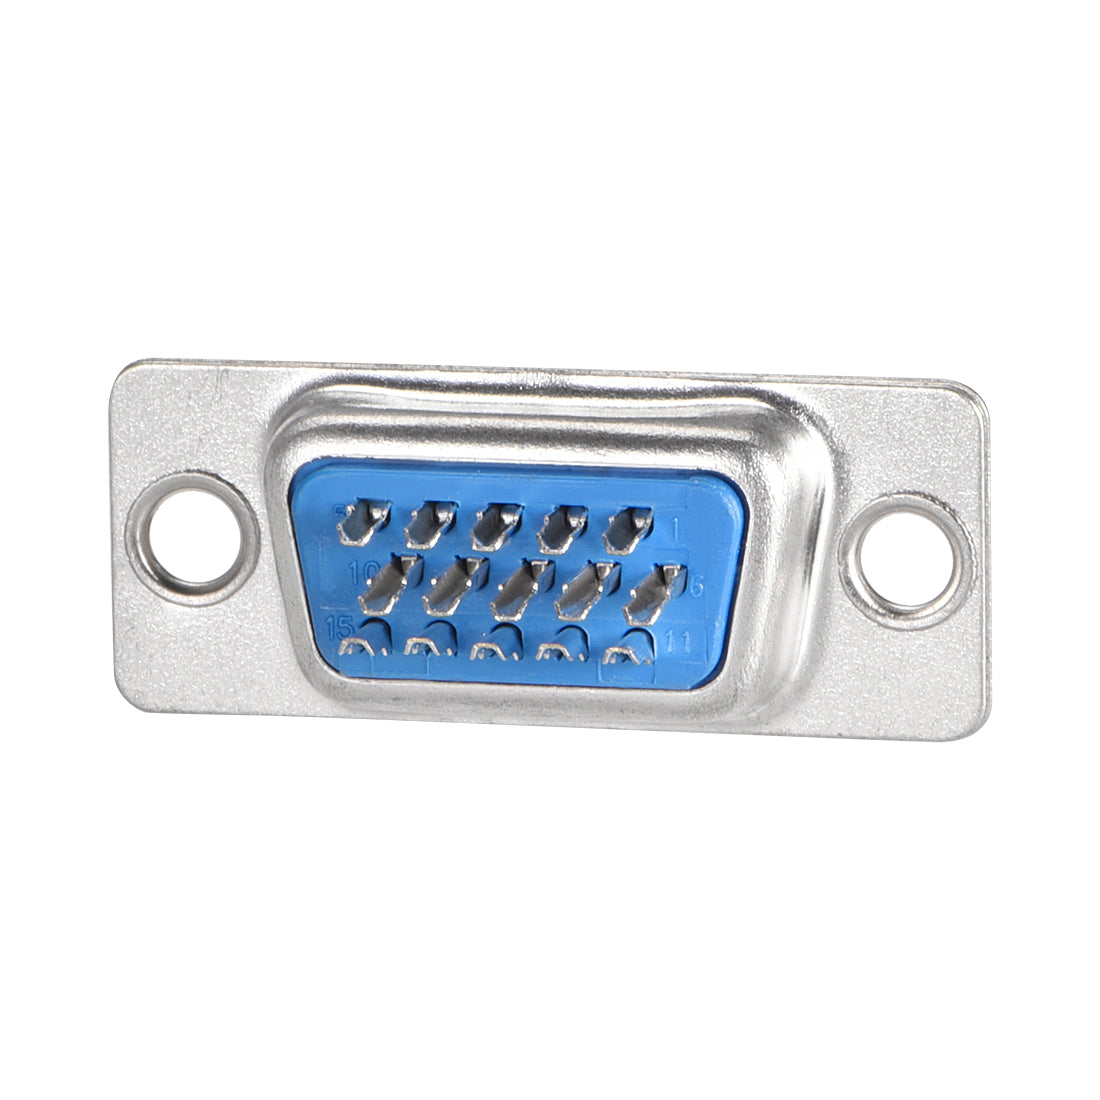 uxcell Uxcell D-sub Connector Male Plug 15-pin 3-row Port Terminal Breakout for Mechanical Equipment CNC Computers Blue 5pcs